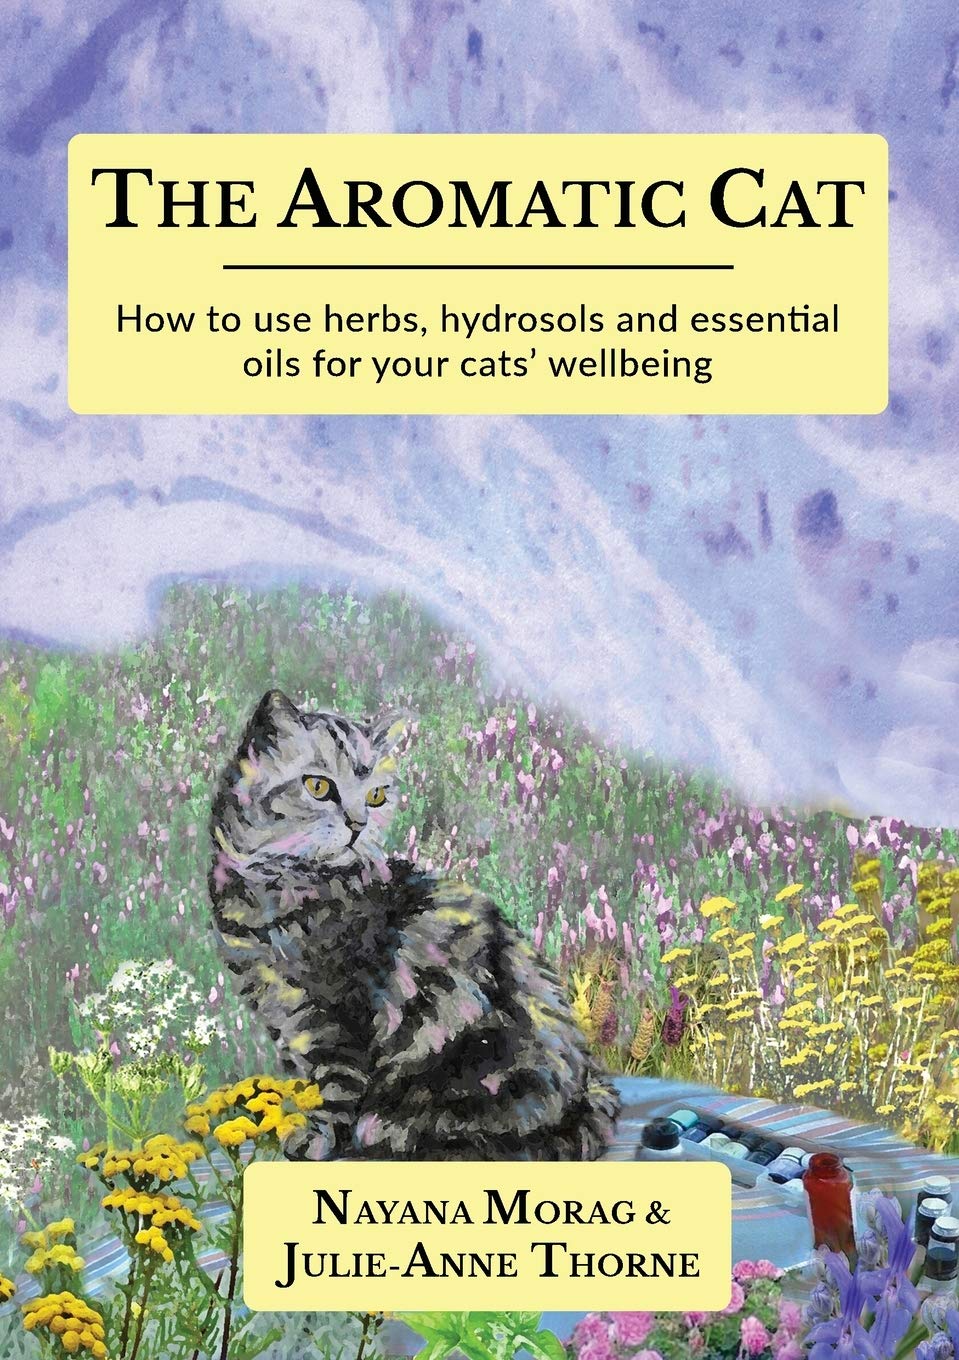 The Aromatic Cat: How to use herbs, hydrosols and essential oils for your cats' wellbeing: 9893311497